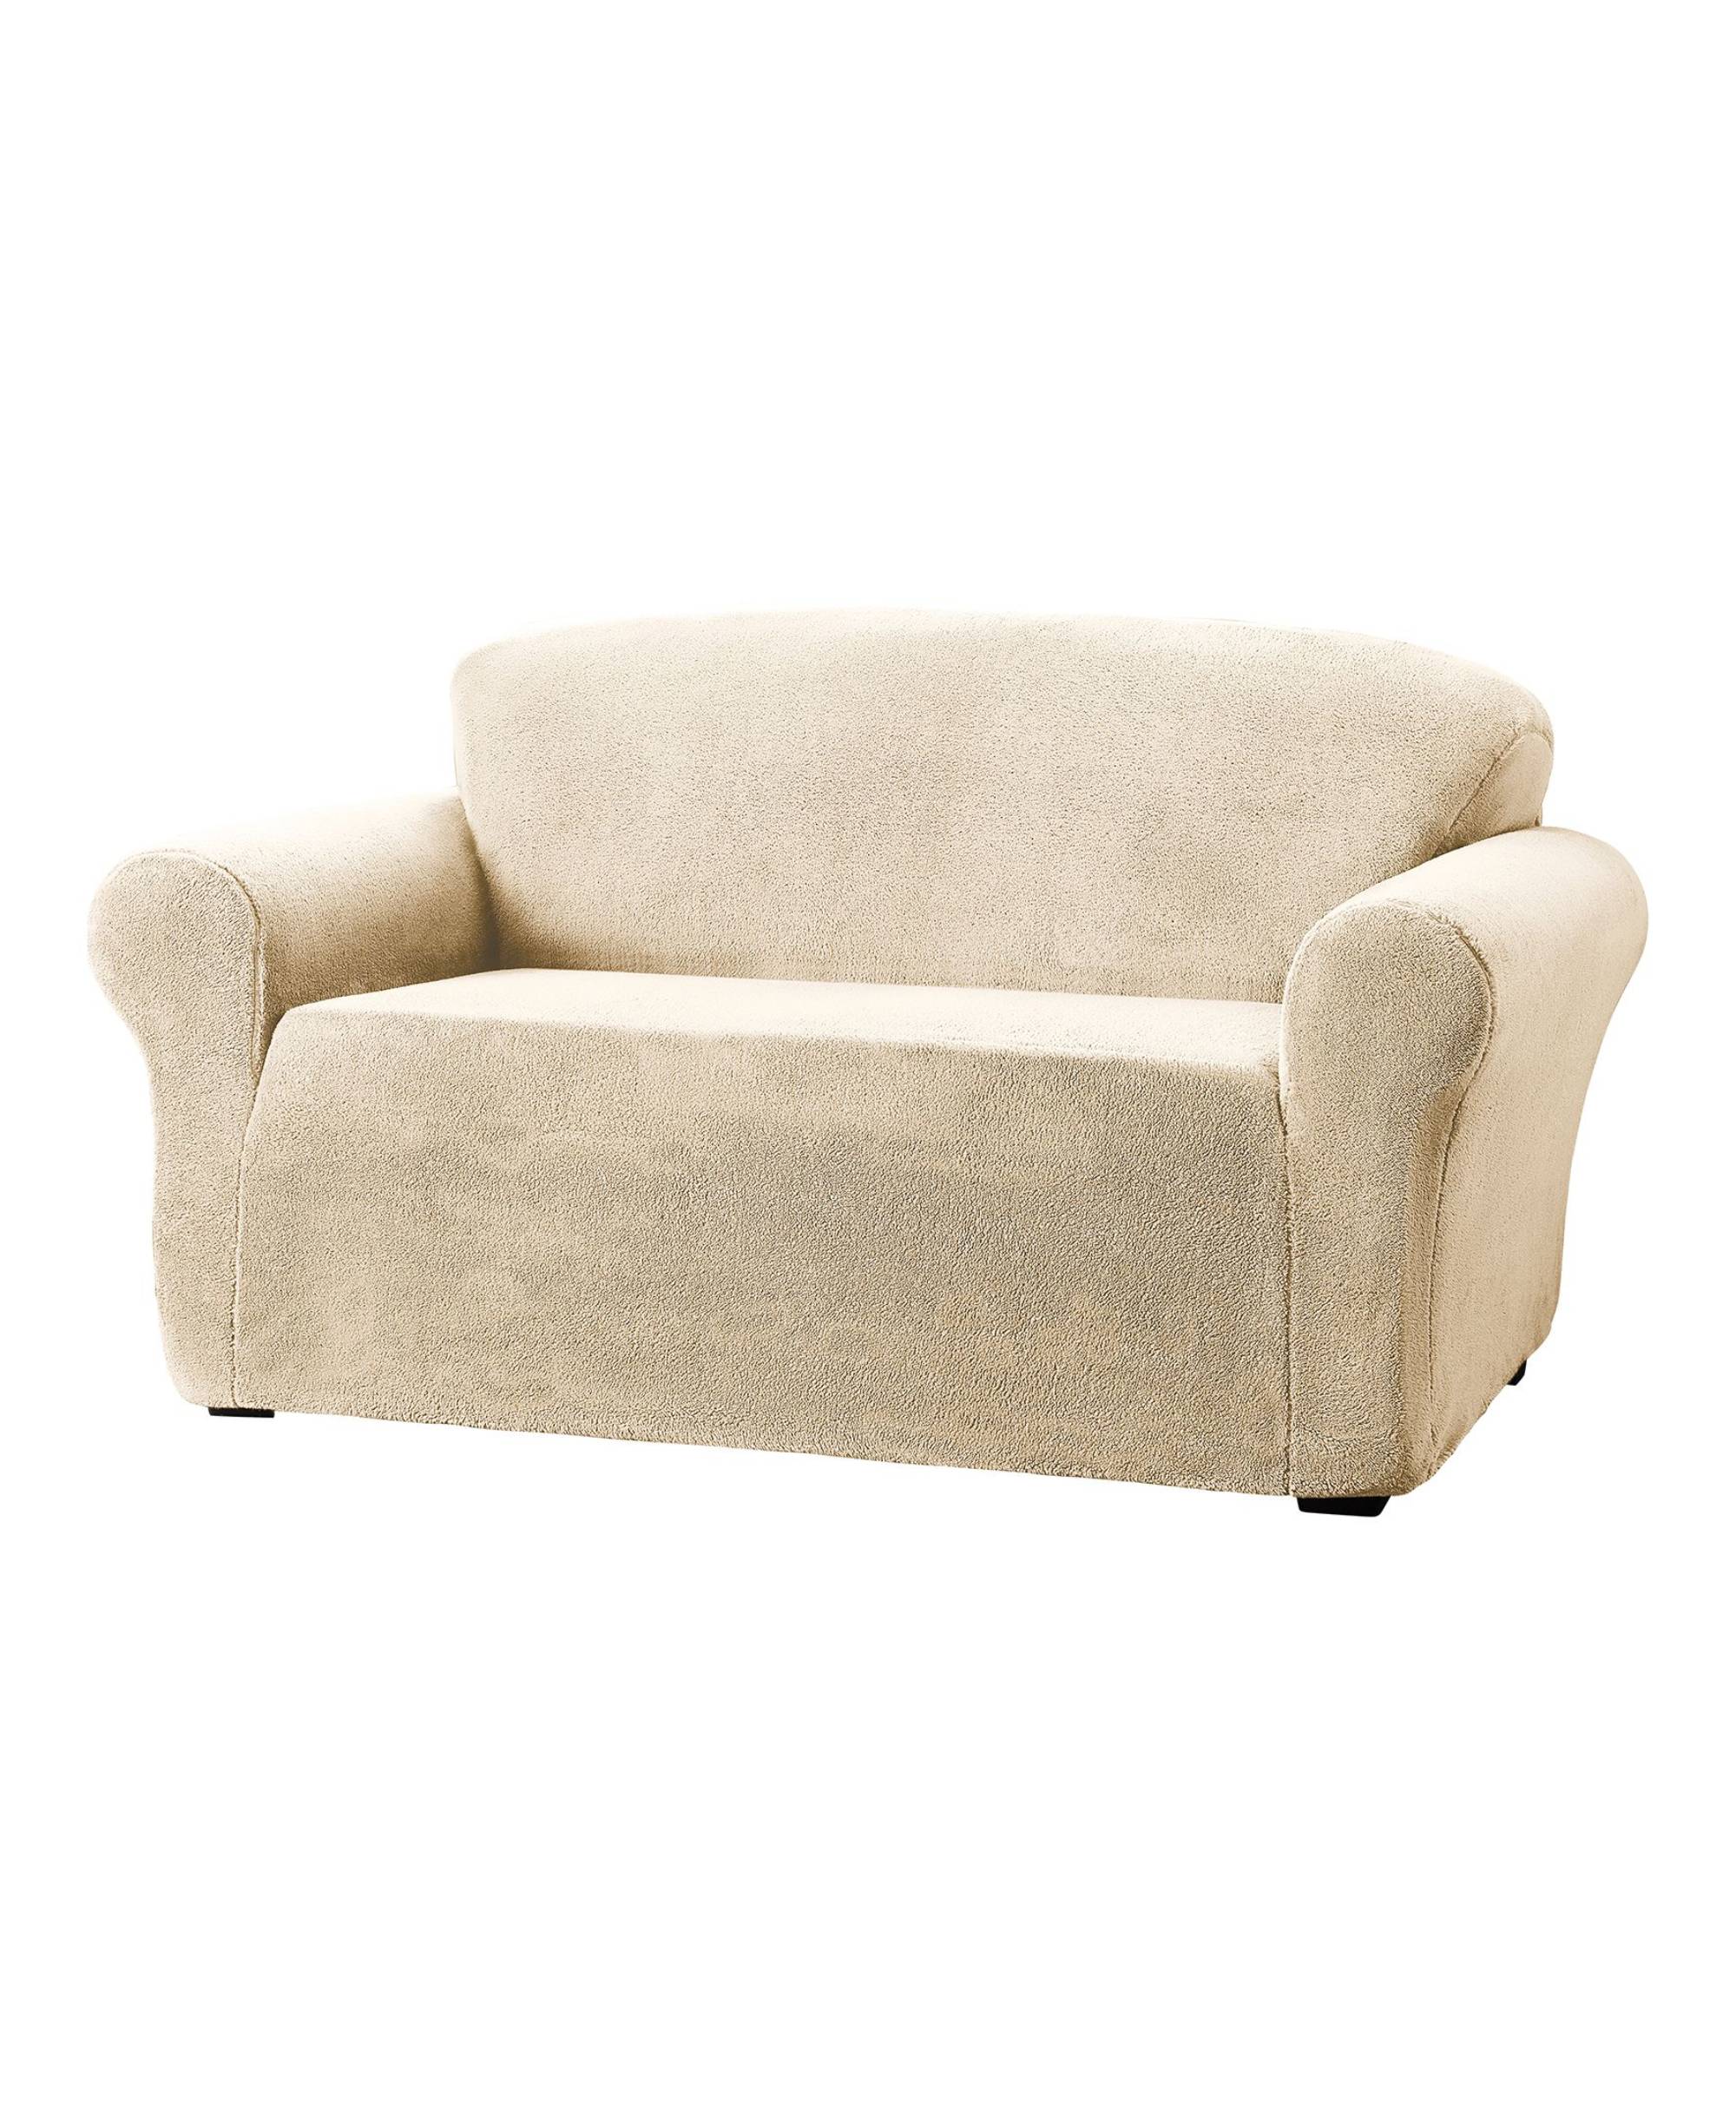 Stretch Sensations Stretch Sherpa 1-Piece Loveseat Furniture Slipcover, Natural - image 2 of 3